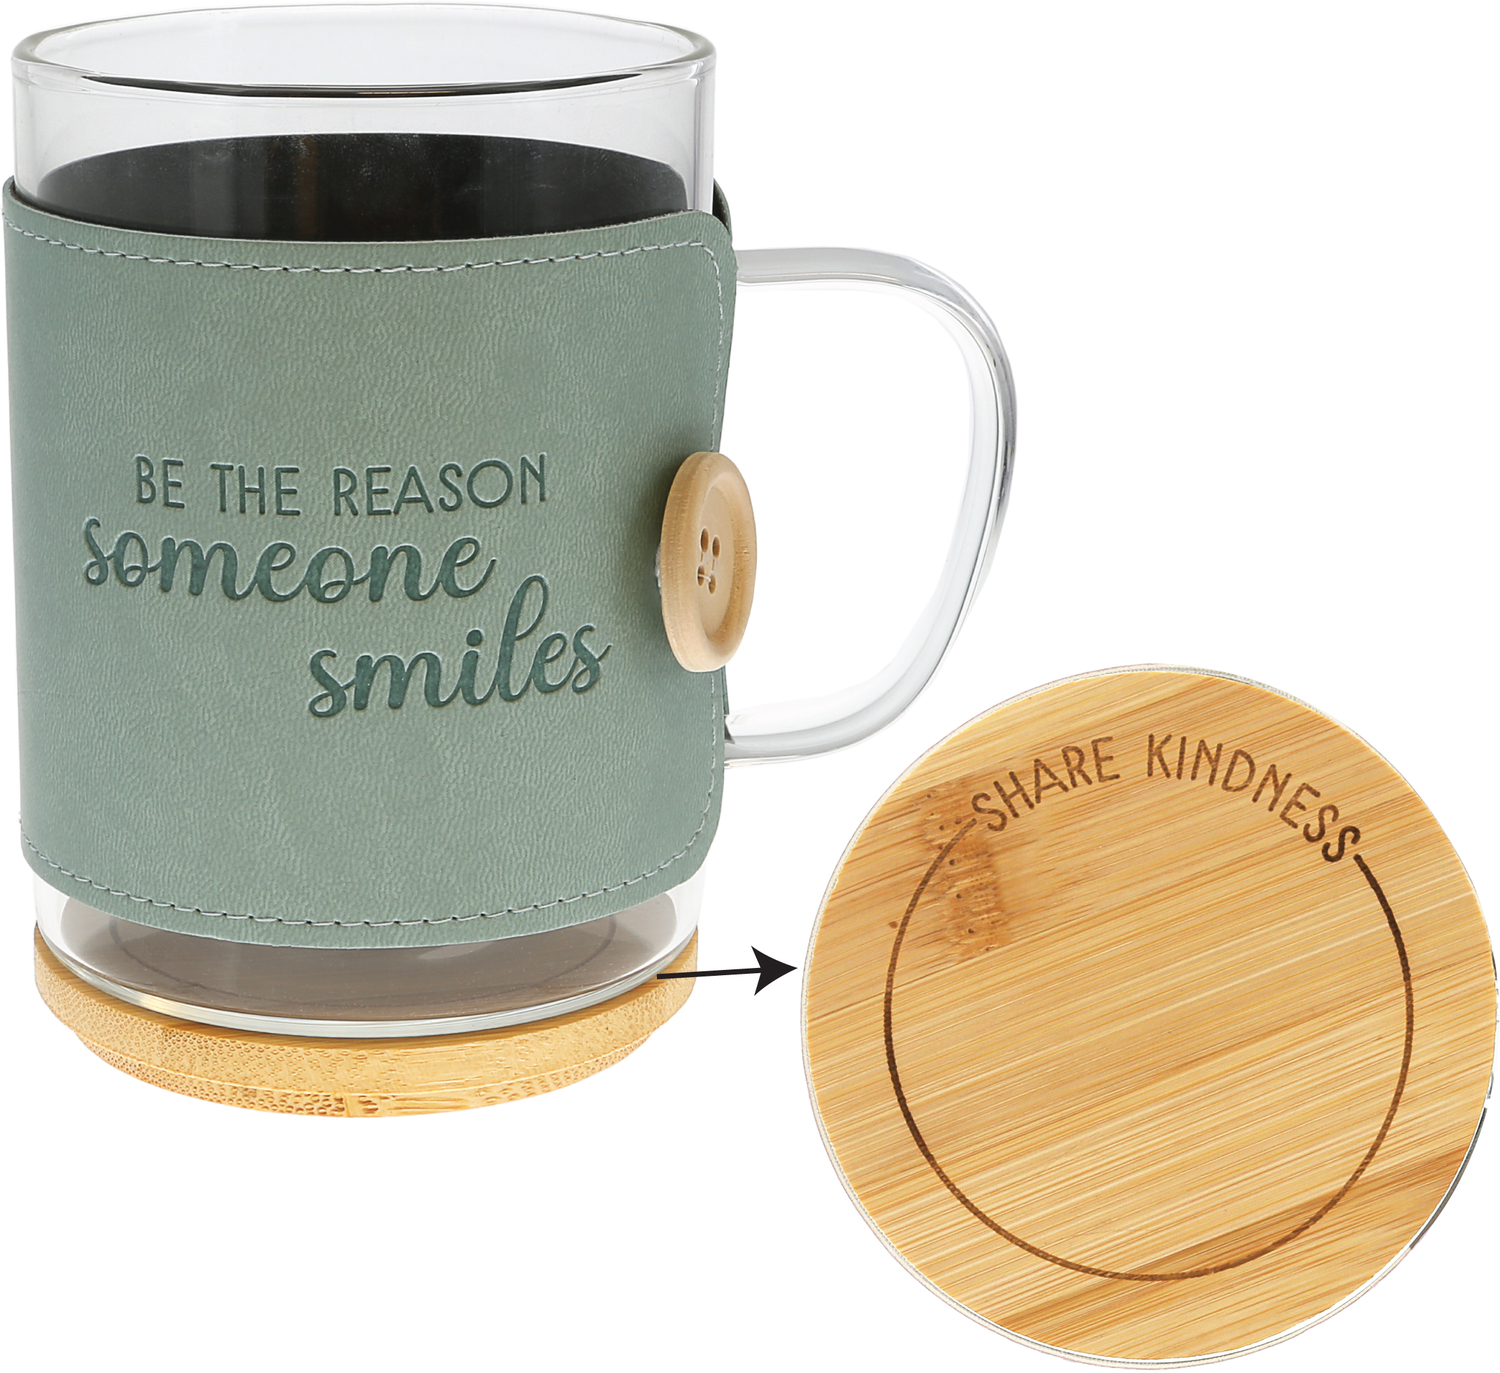 Smiles by Wrapped in Kindness - Smiles - 16 oz Wrapped Glass Mug with Coaster Lid